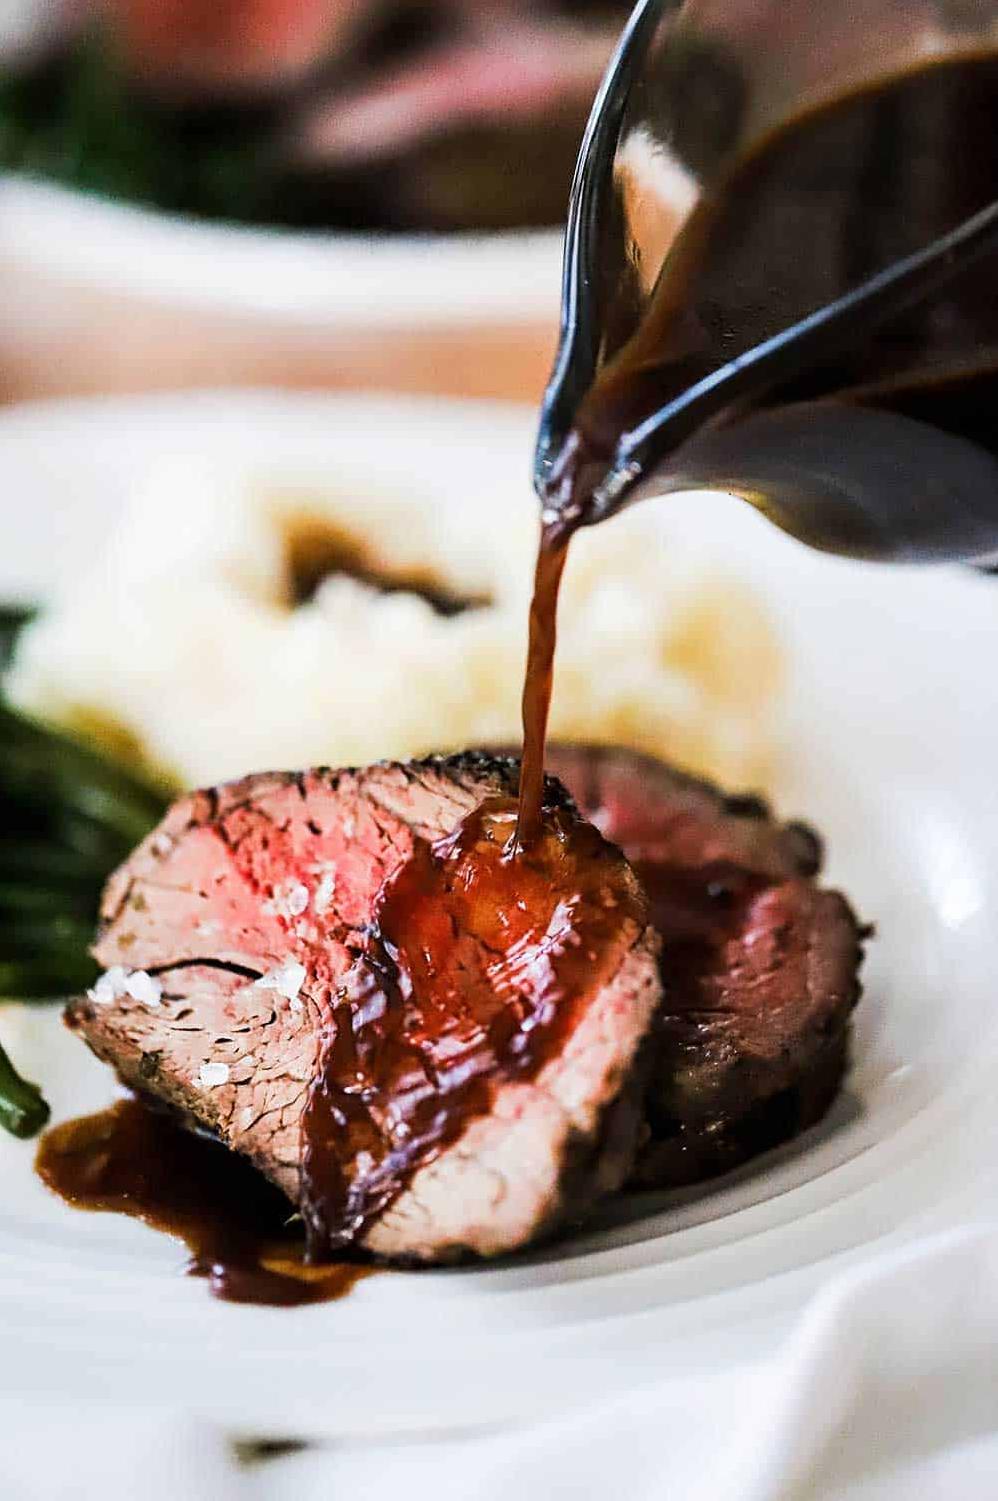  Looking for a flavorful and hearty meal? Look no further than this beef tenderloin with red wine sauce.